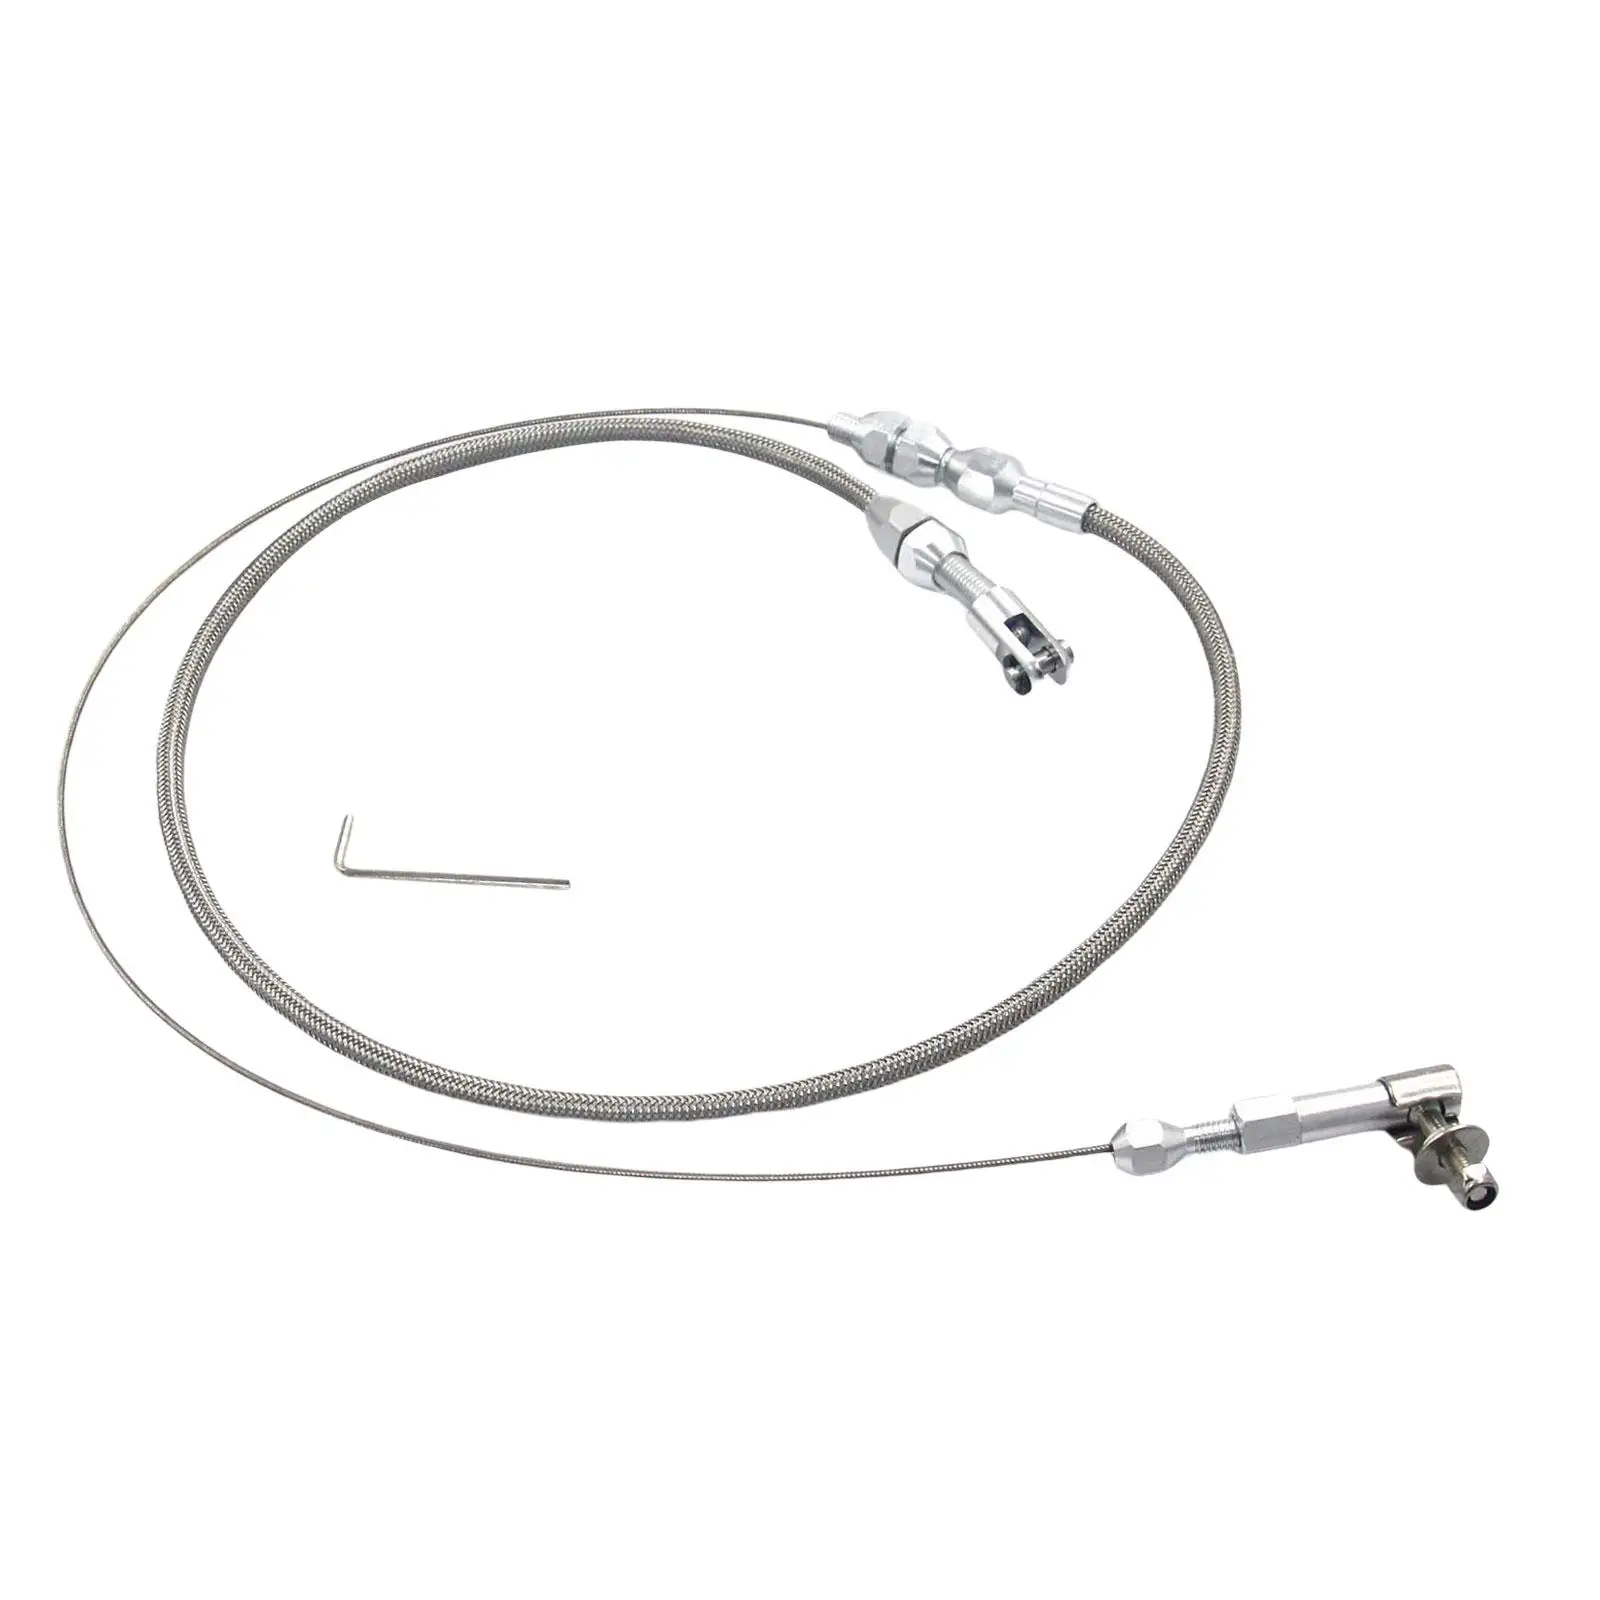 Swap Fuel Line 91cm Braided Throttle Cable for Replacement Accessories